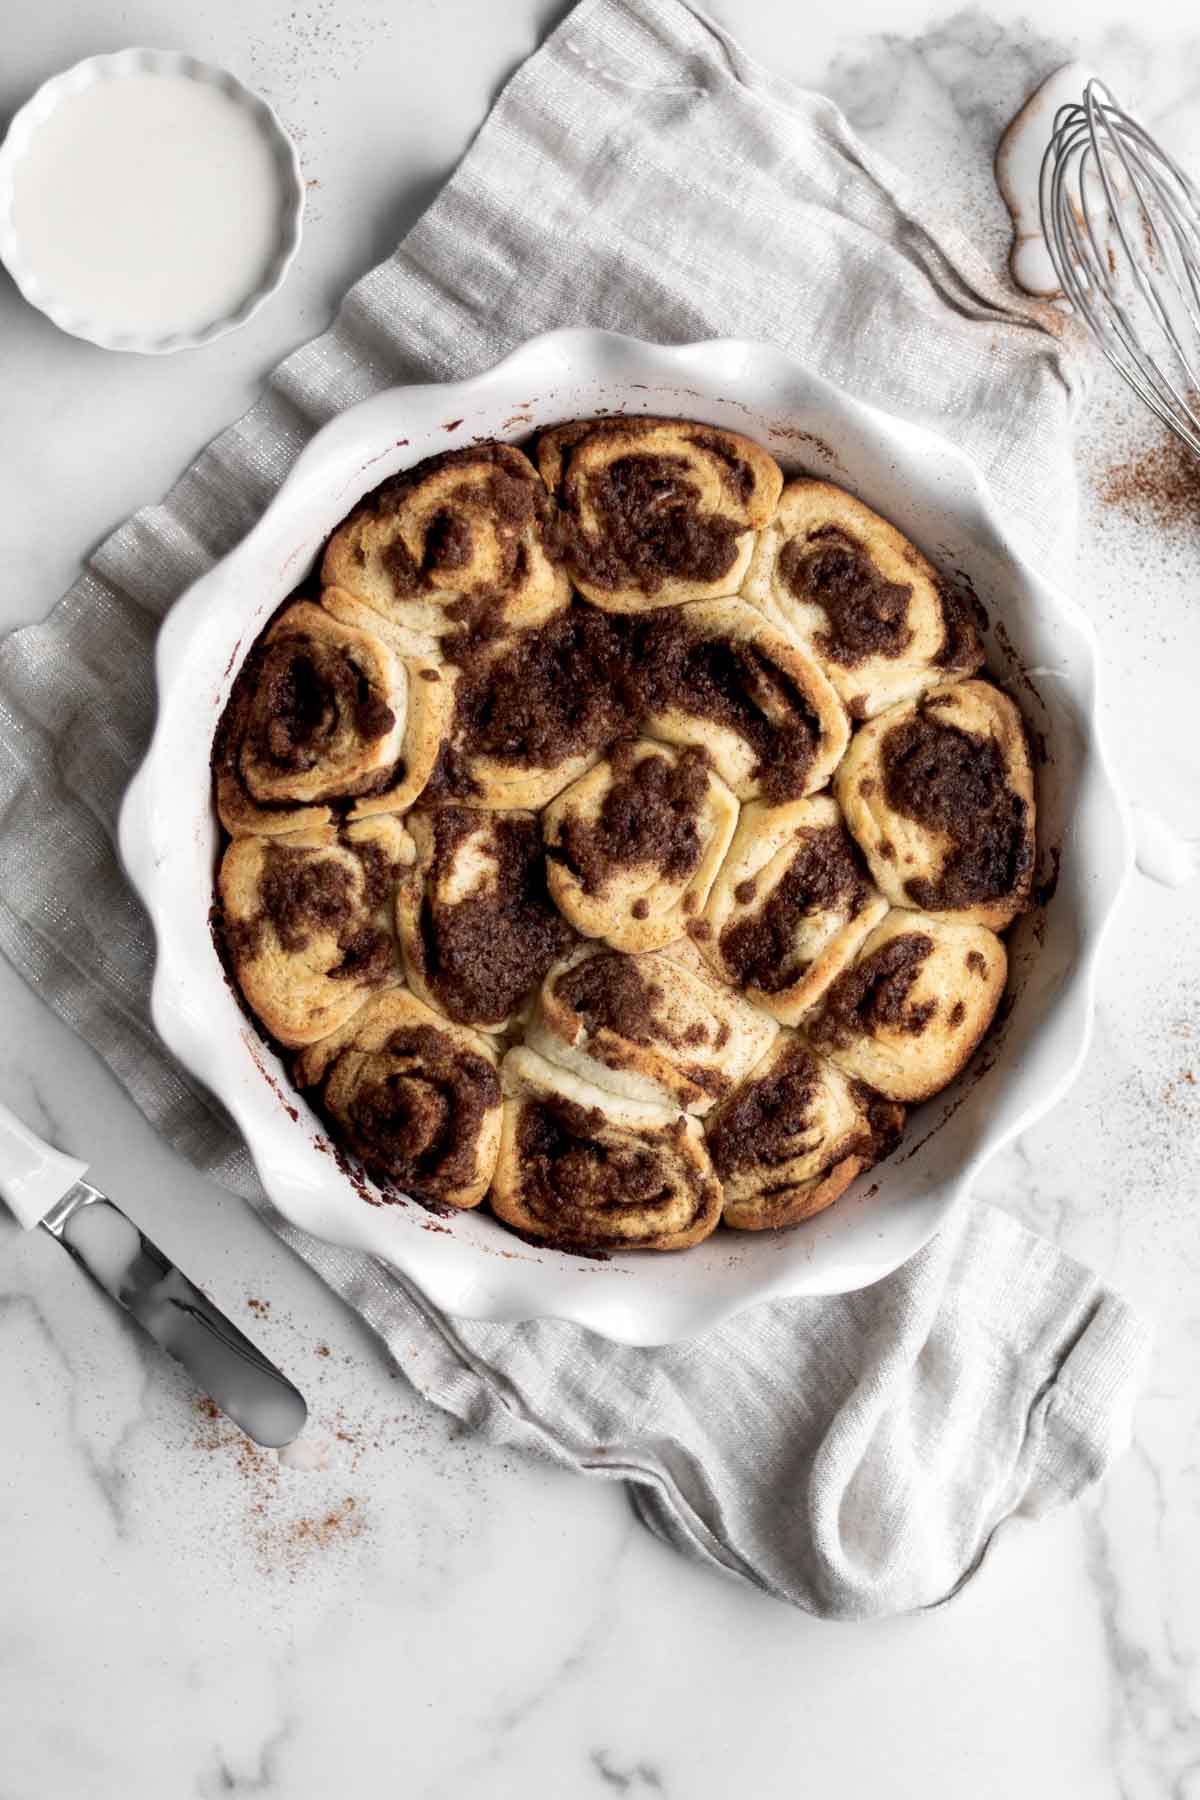 Cinnamon Rolls erupting with cinnamon and brown sugar from their swirls.